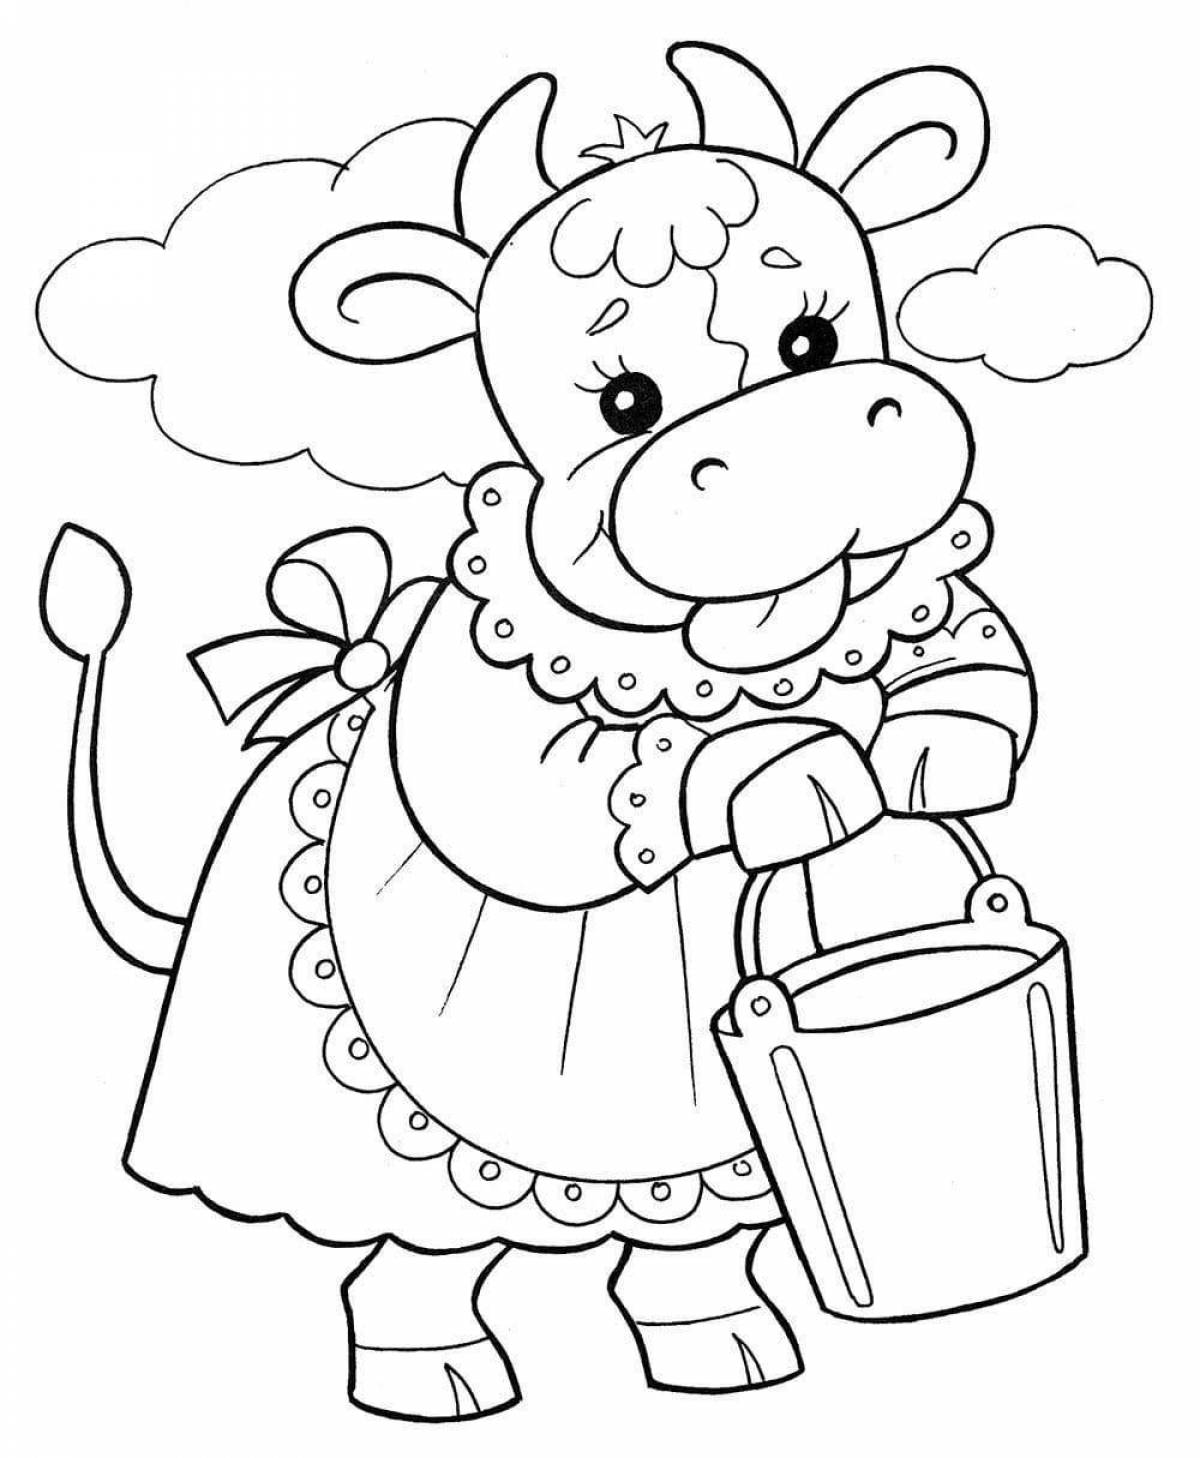 Cow coloring book for kids 3-4 years old